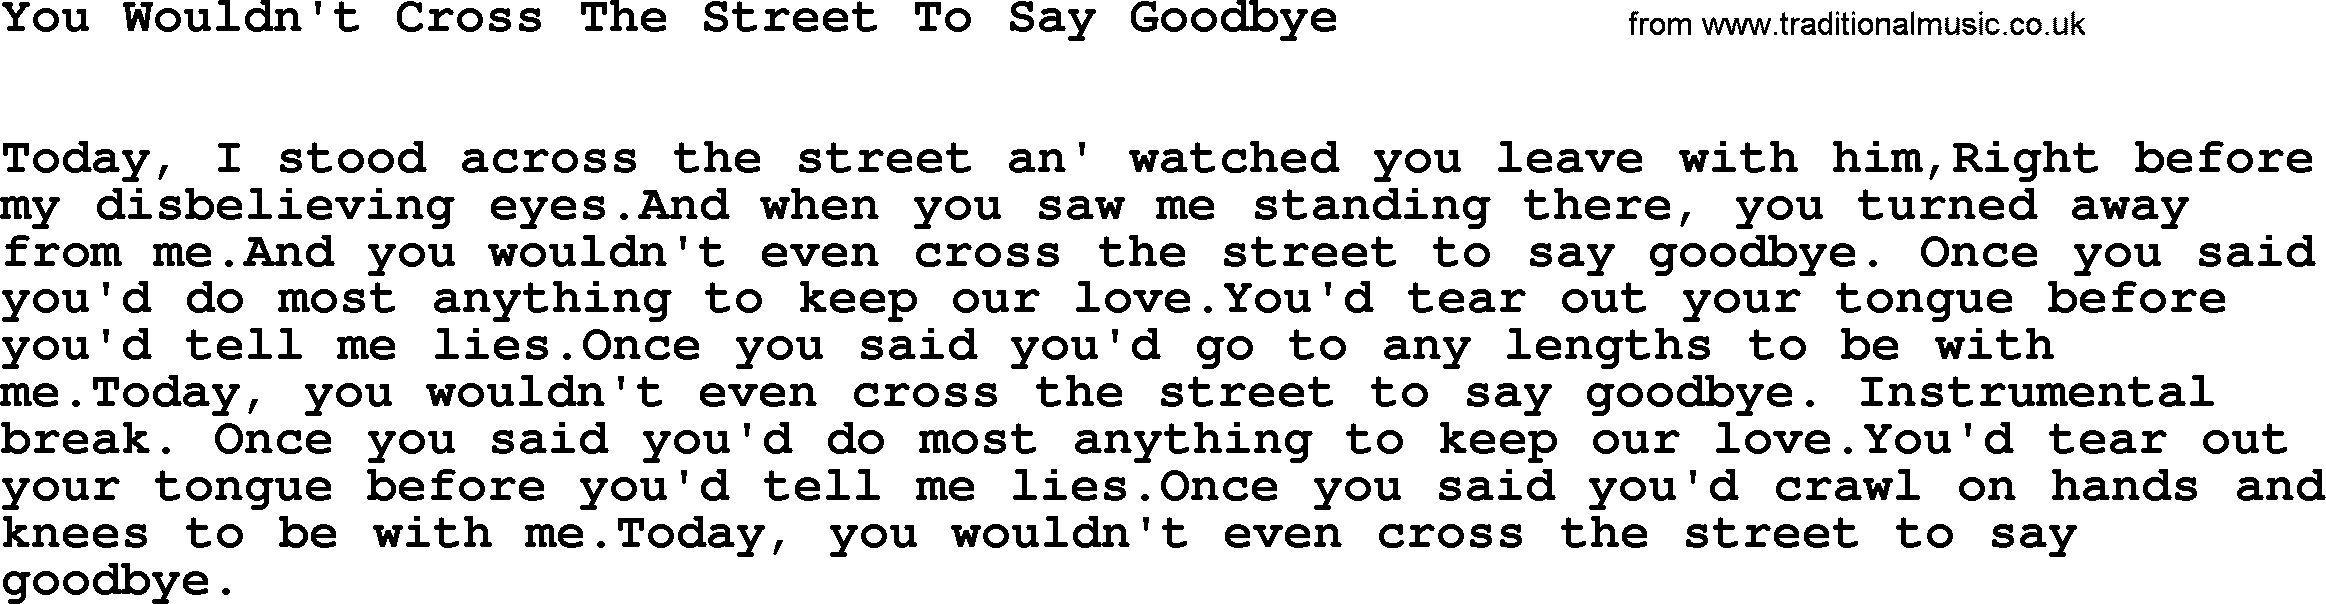 Willie Nelson song: You Wouldn't Cross The Street To Say Goodbye lyrics